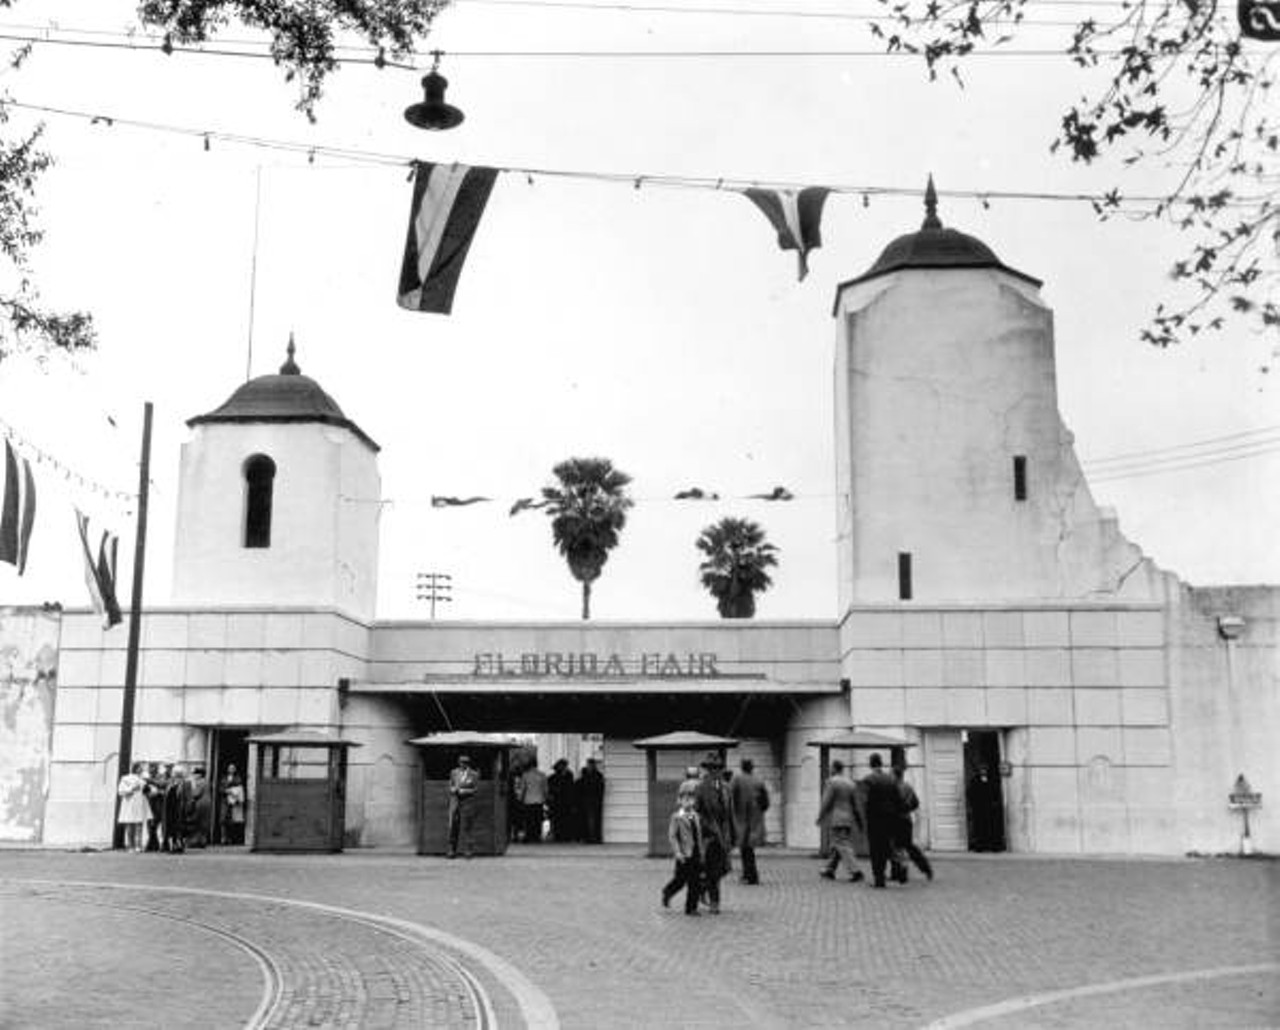 Entrance gateway to the Florida State Fair, 1947